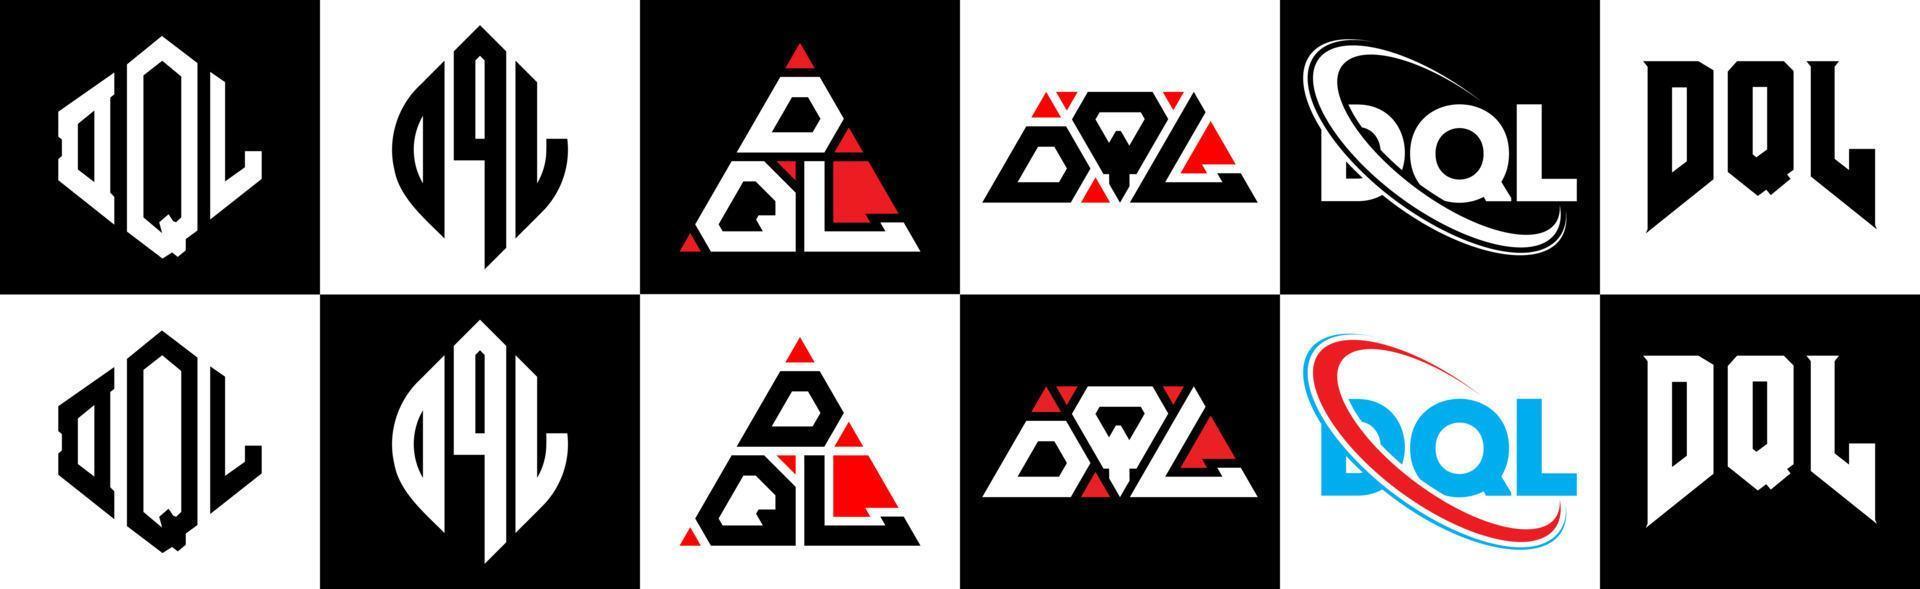 DQL letter logo design in six style. DQL polygon, circle, triangle, hexagon, flat and simple style with black and white color variation letter logo set in one artboard. DQL minimalist and classic logo vector